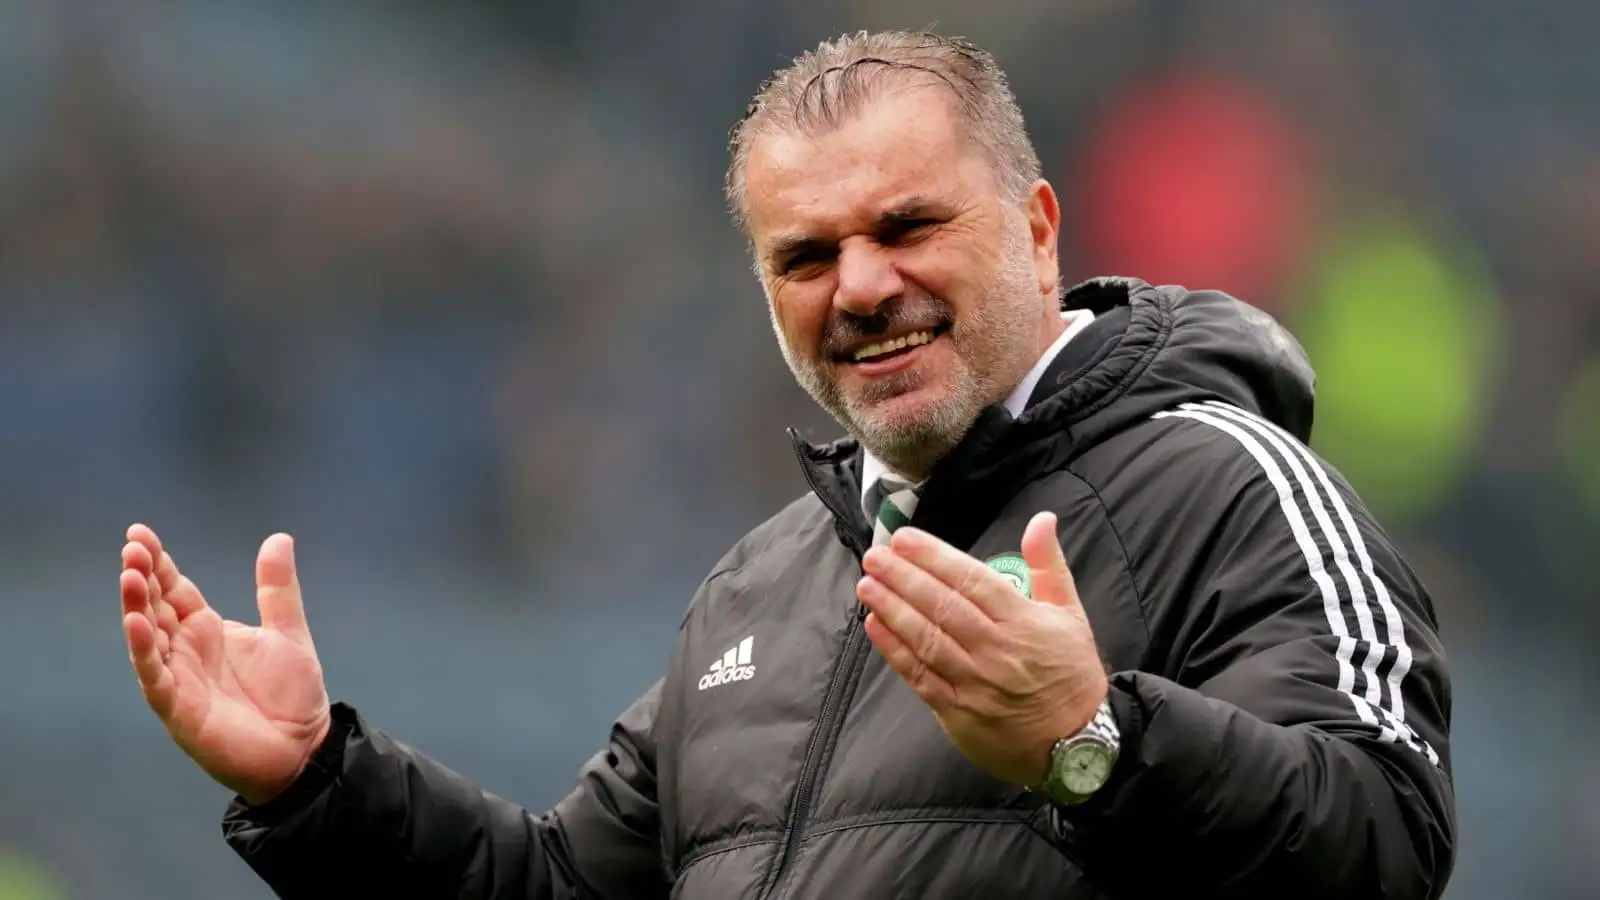 Celtic manager Angelos Postecoglou celebrates at the end of the Scottish Cup semi-final match at Hampden Park, Glasgow